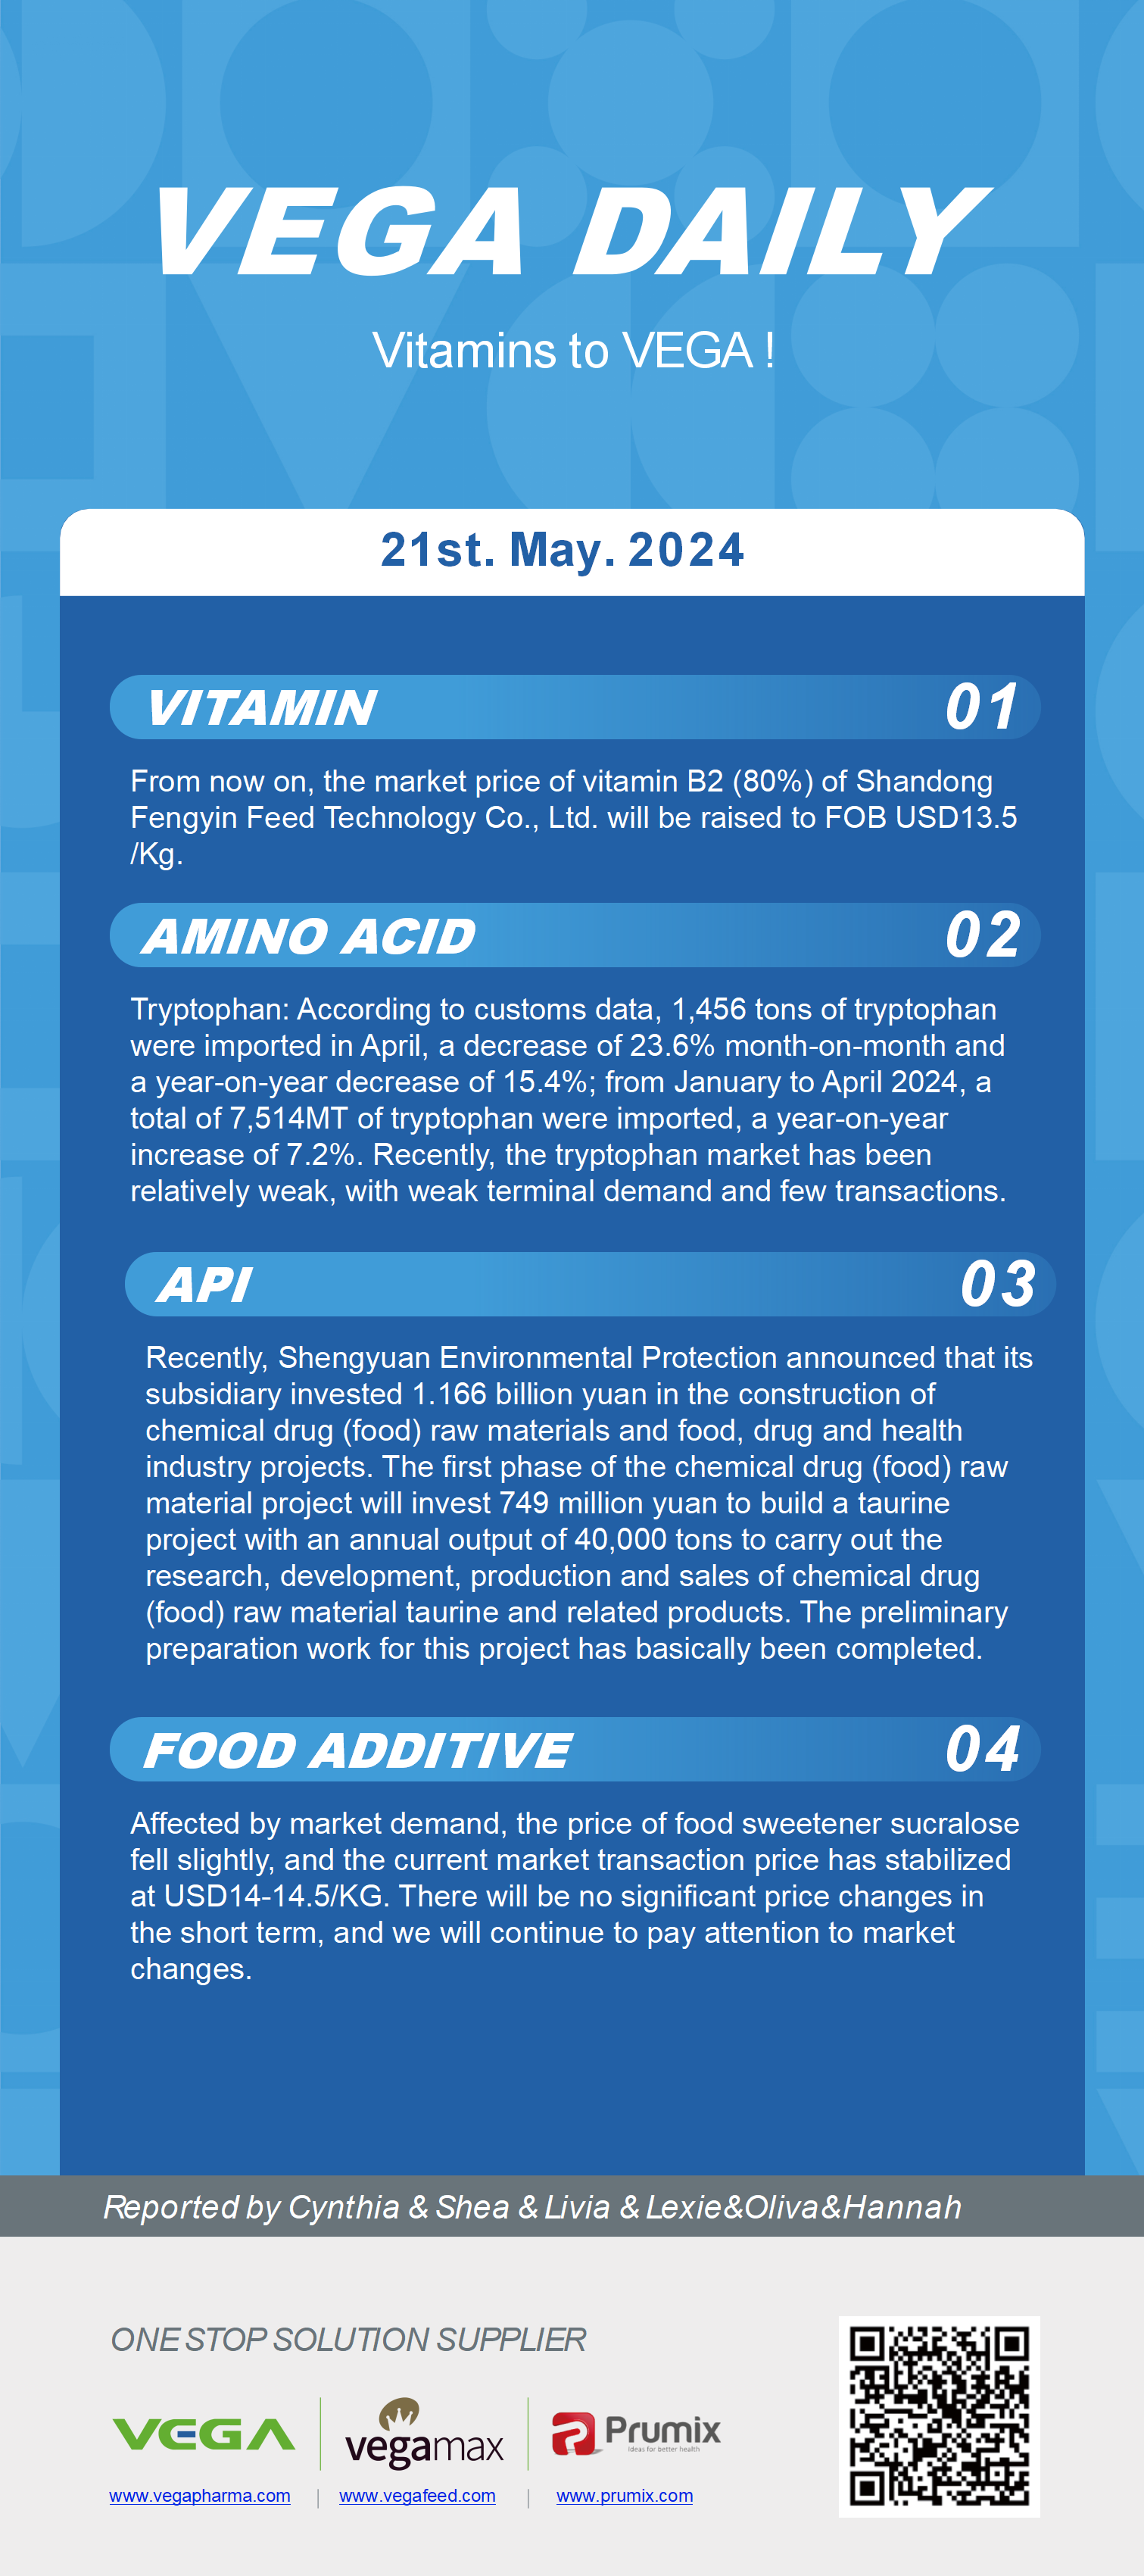 Vega Daily Dated on May 21st 2024 Vitamin Amino Acid APl Food Additives.png